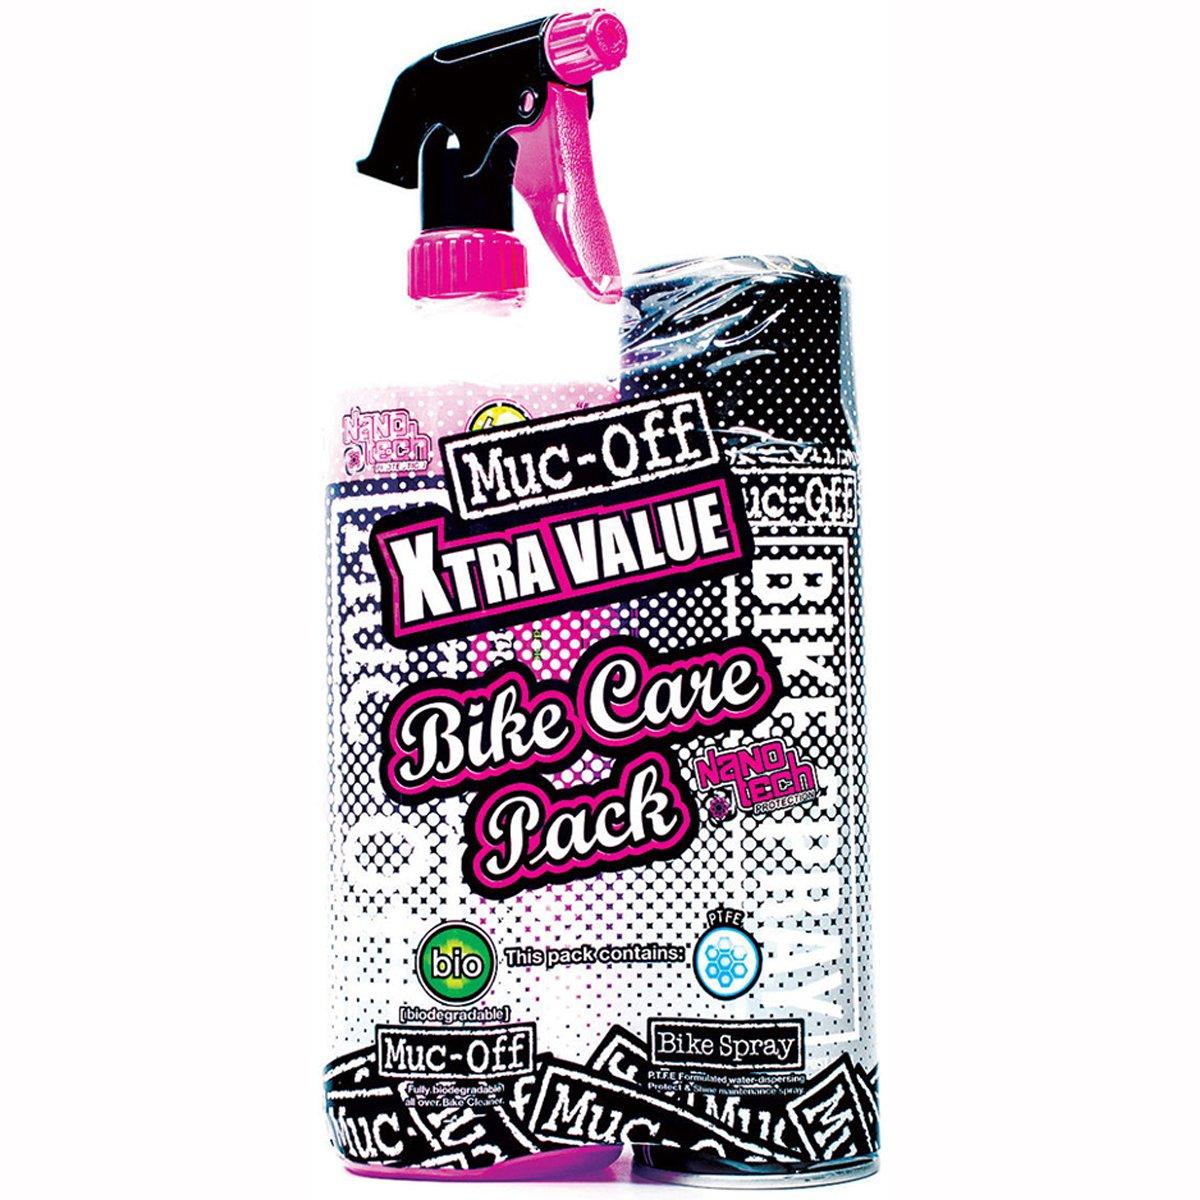 Muc-Off Motorcycle Care Pack - Pink - Browse our range of Care: Cleaning - getgearedshop 